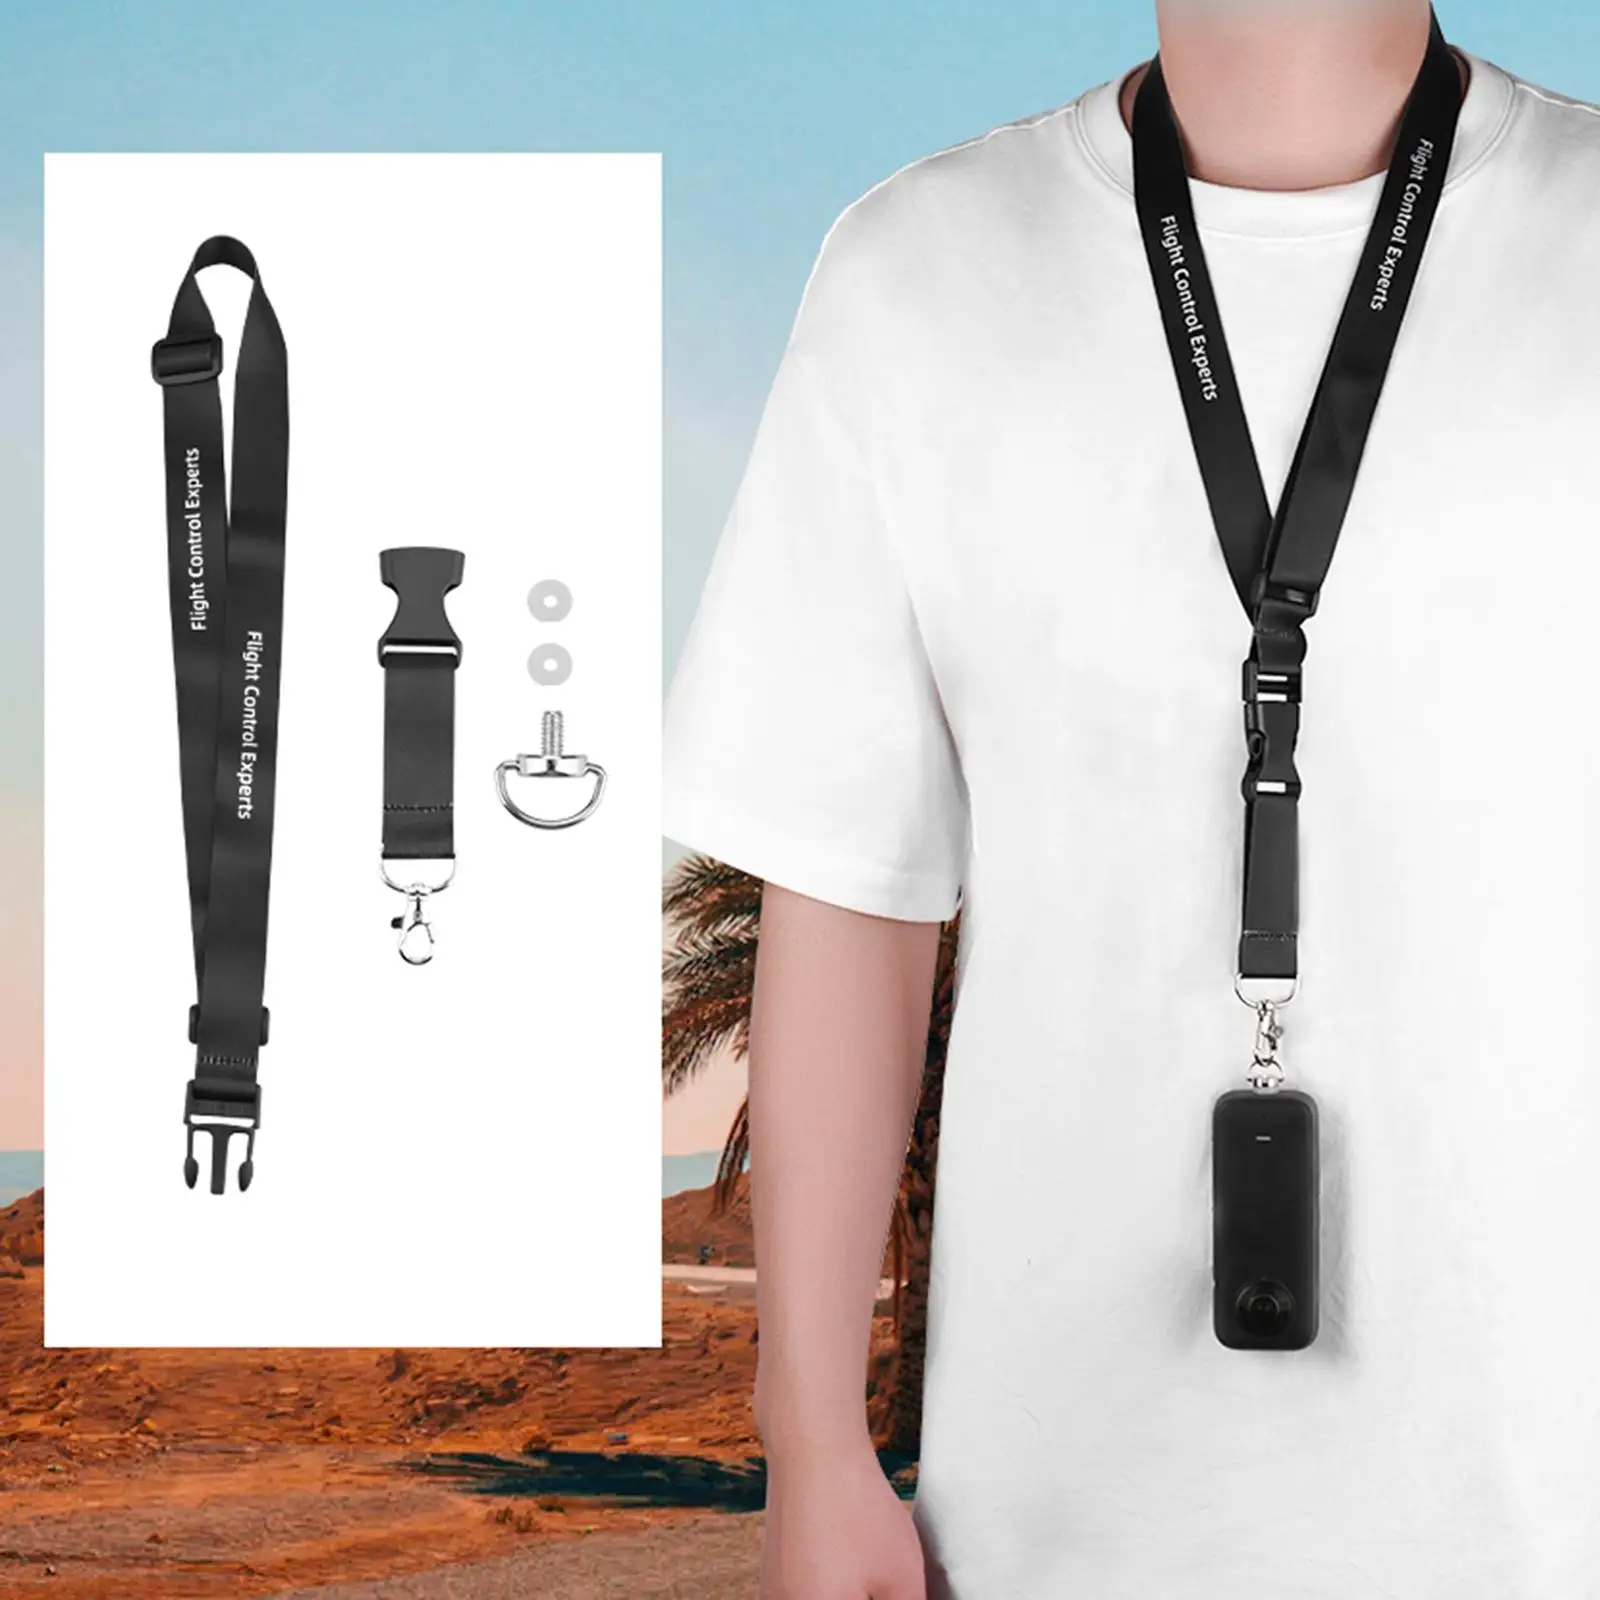 Neck Strap Lanyard Lightweight Replace Parts Widen for One x3 x2 Accessories